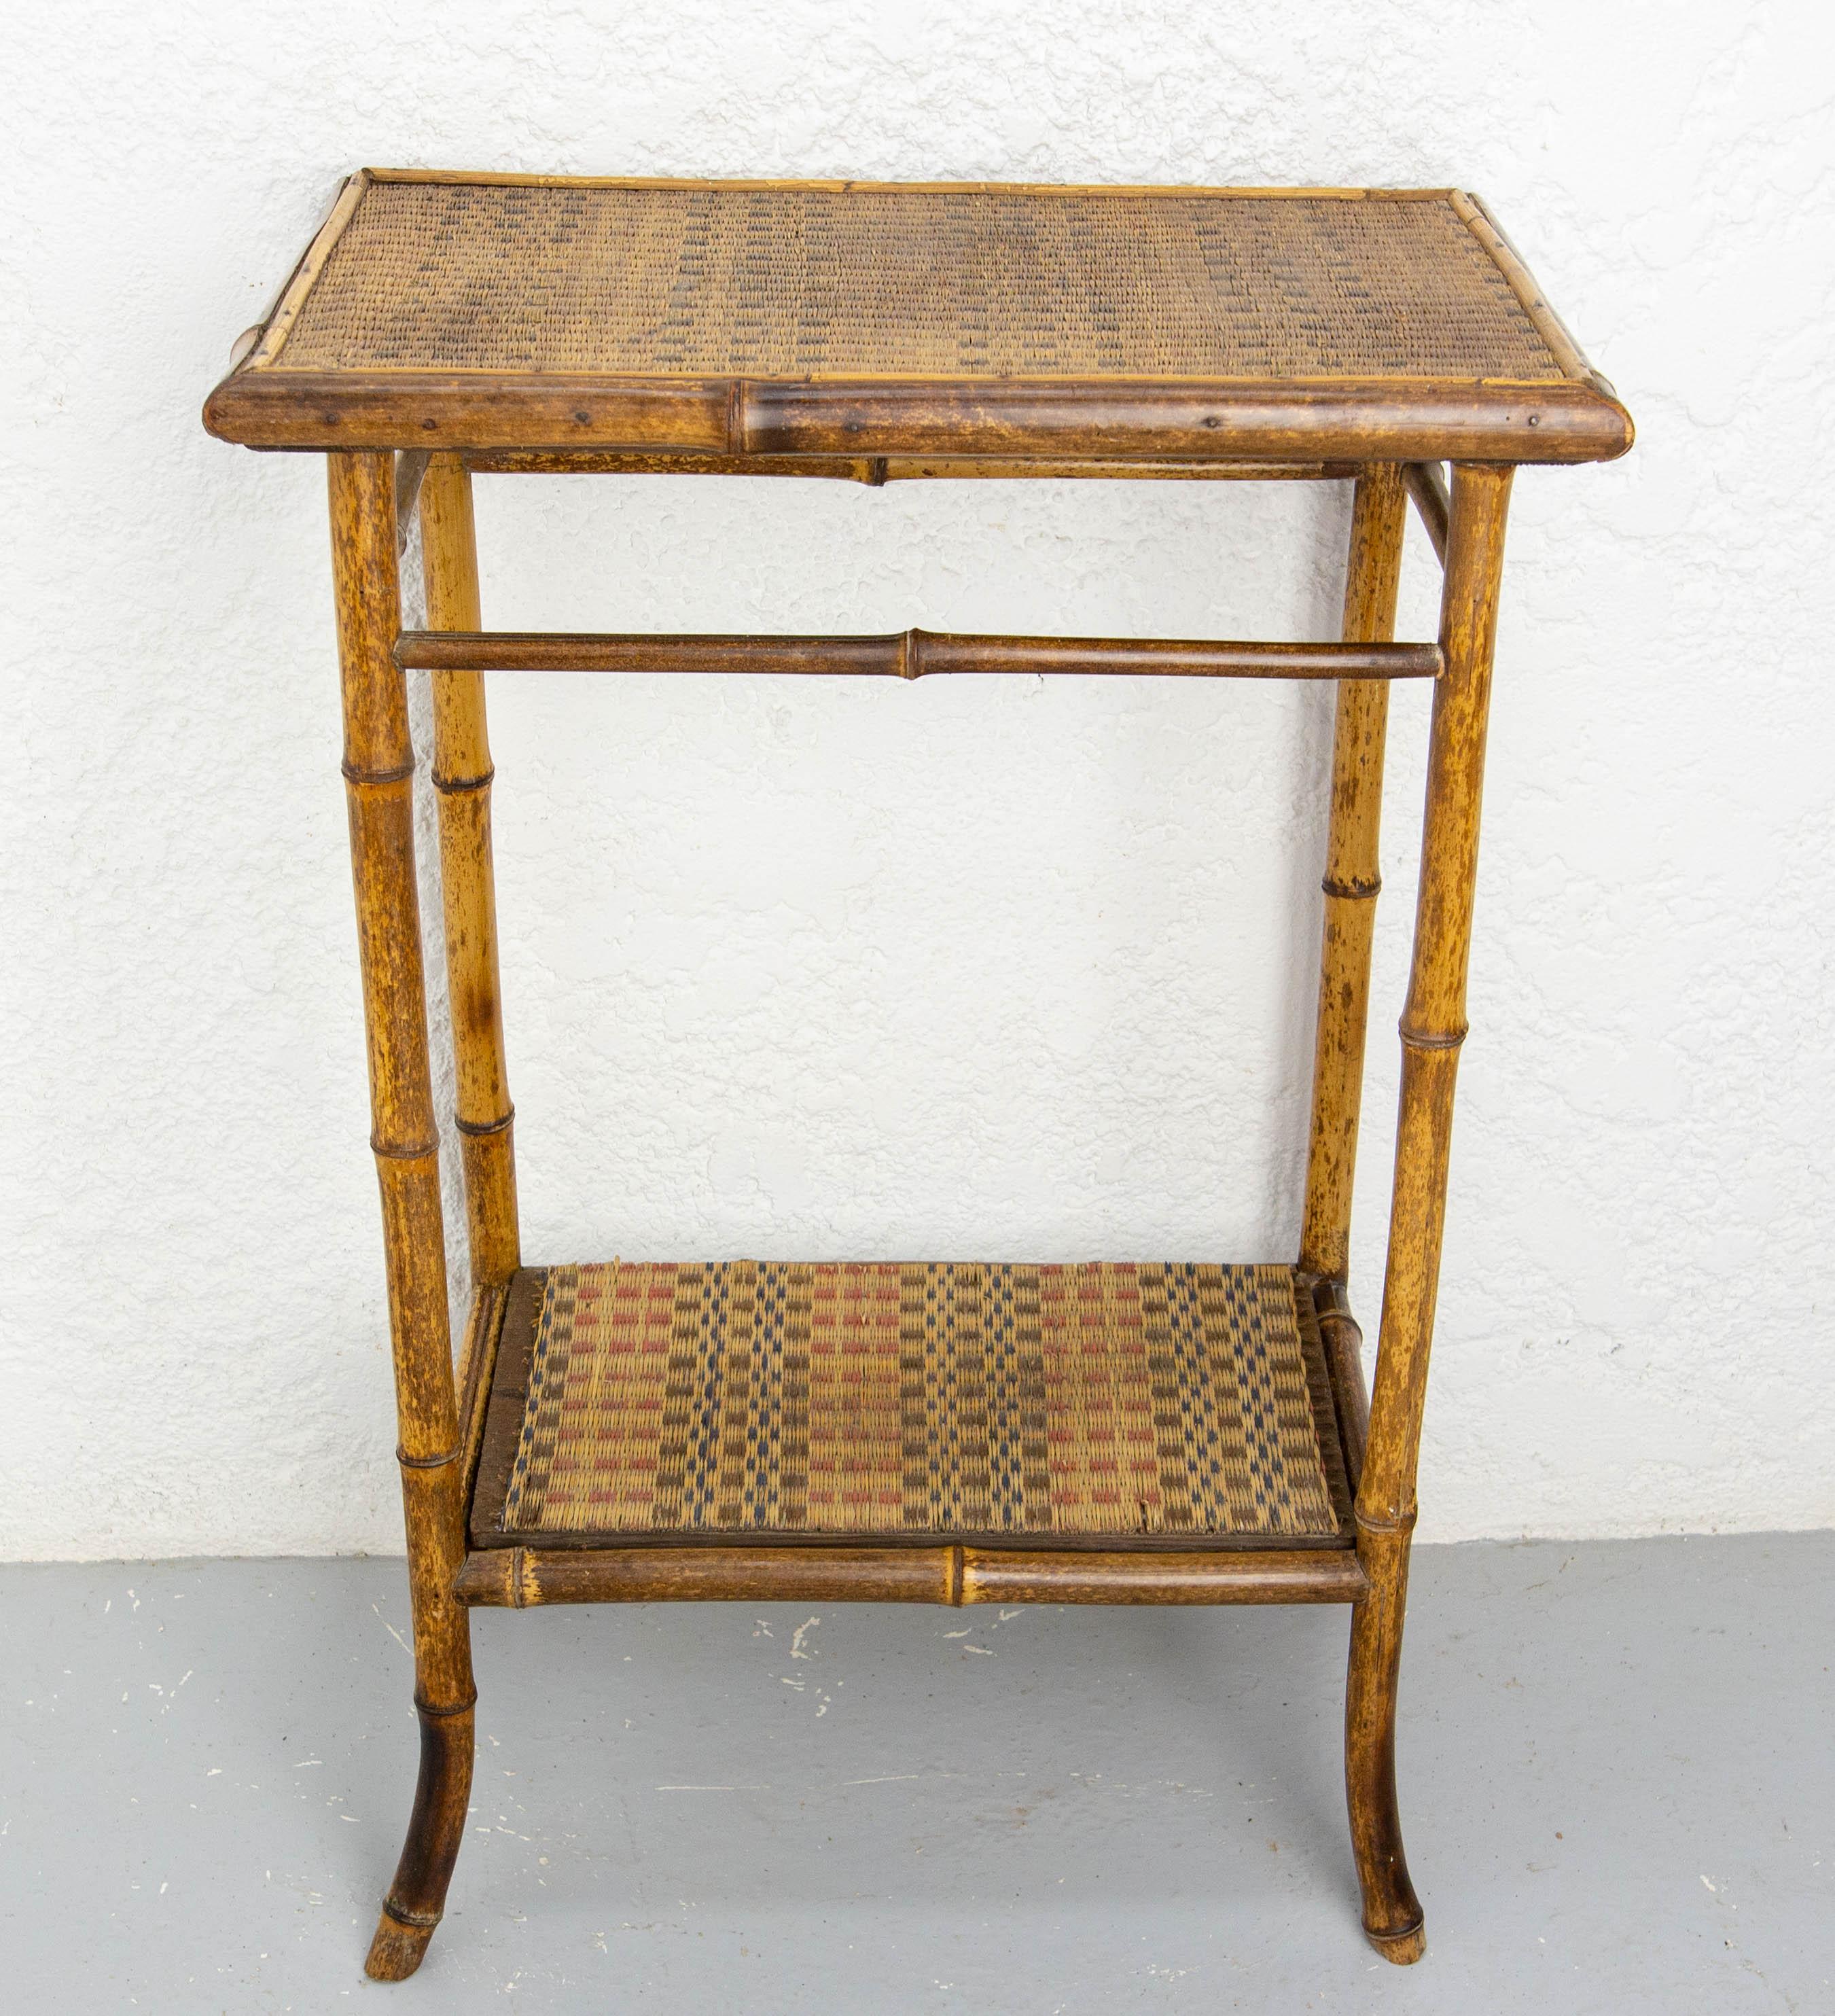 20th Century French Bamboo and Straw High Side Table, circa 1920